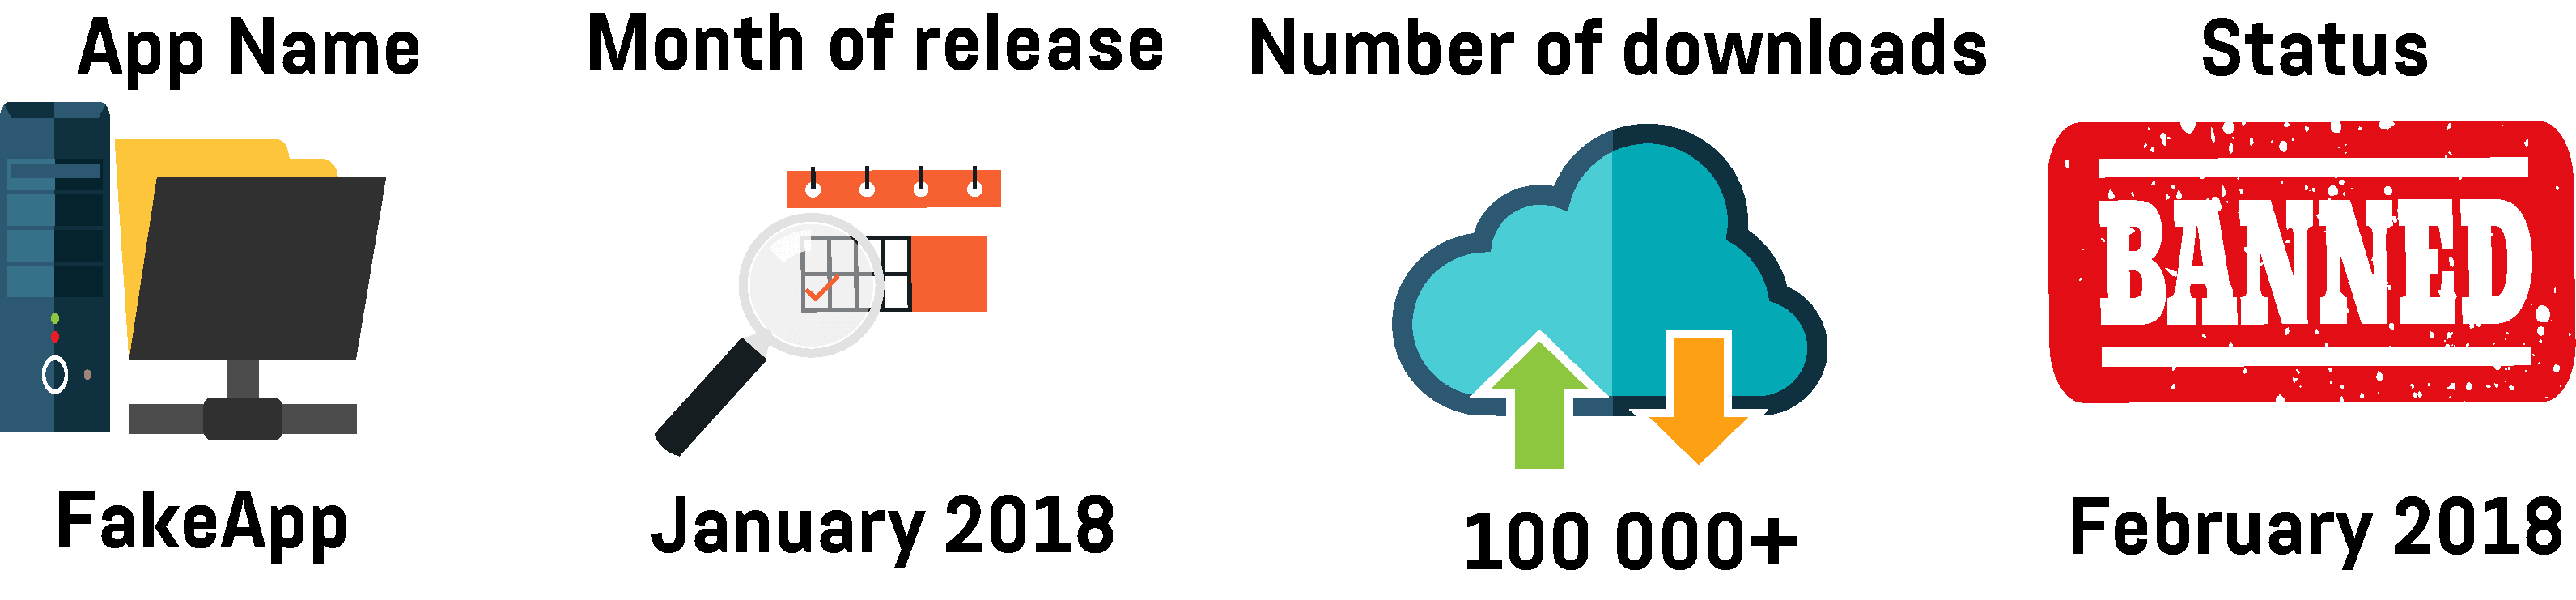  An infographic showing the name, month of release, number of downloads, and status of the deep fakes app FakeApp 